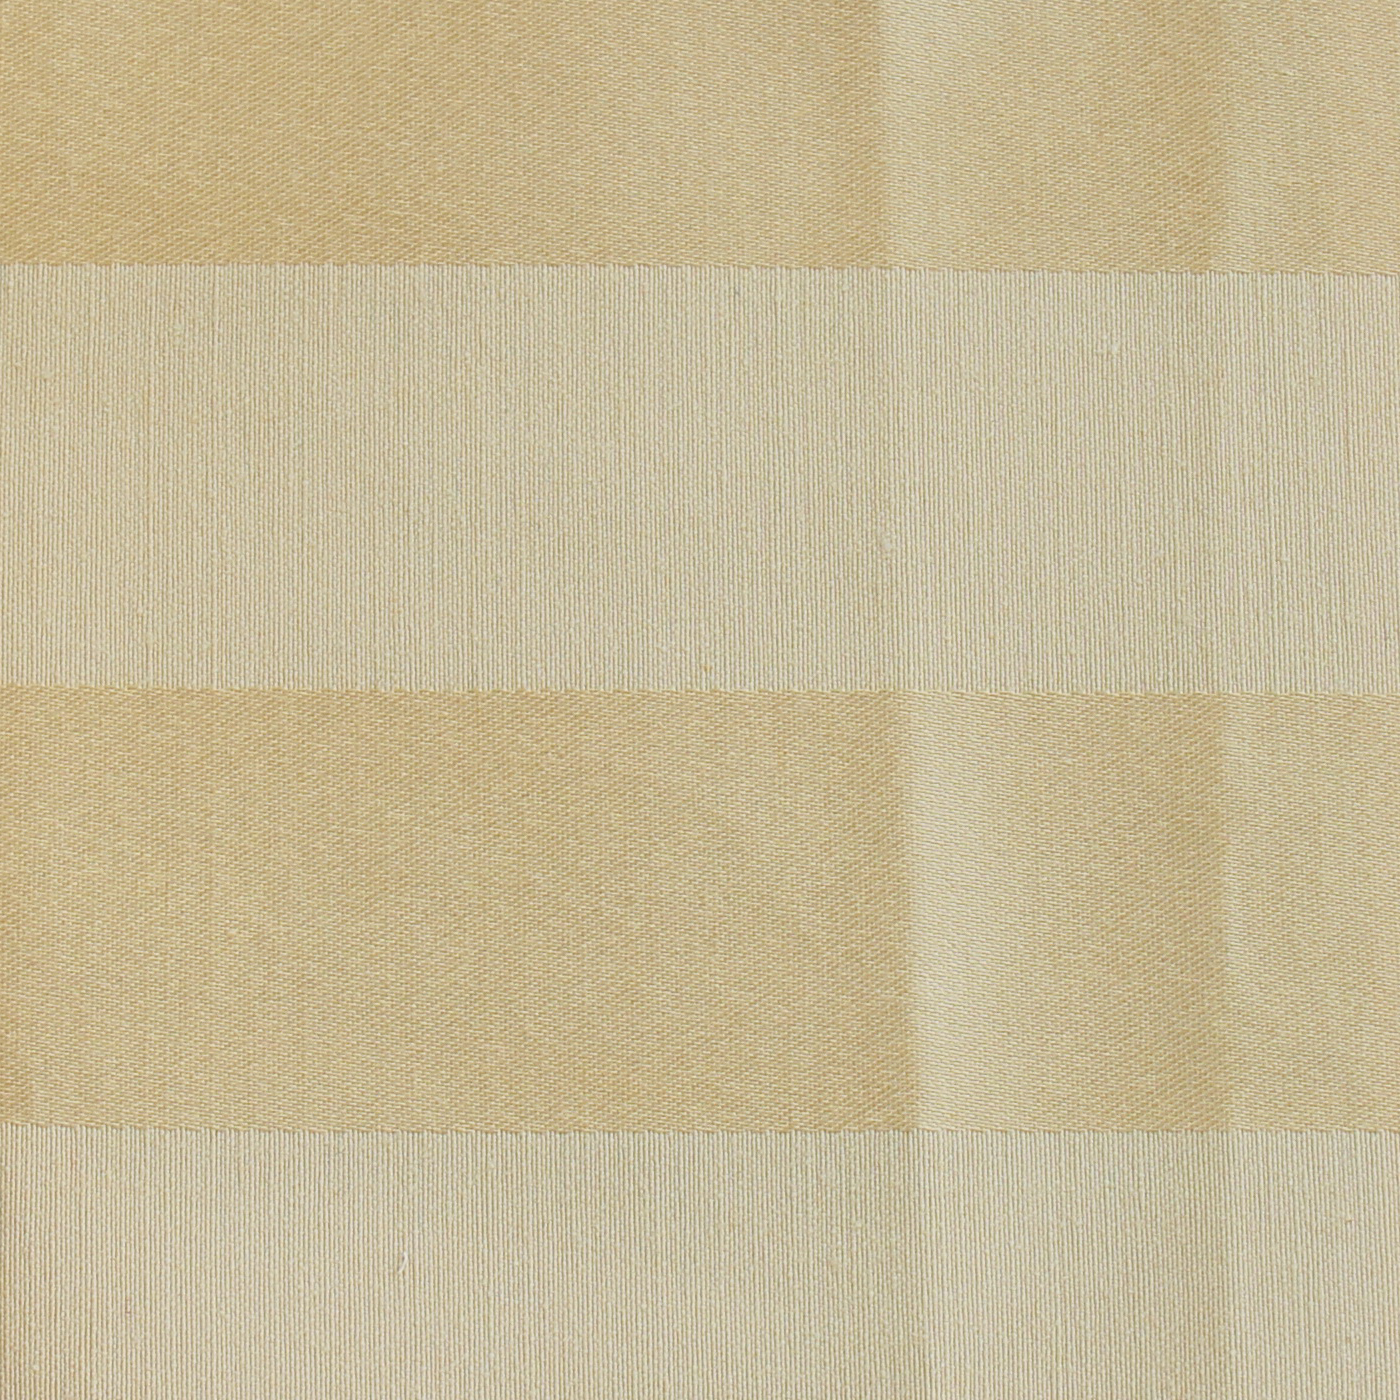 NO 14-45 RS X1 Plus NO 24 Fabric Upholstery Sample